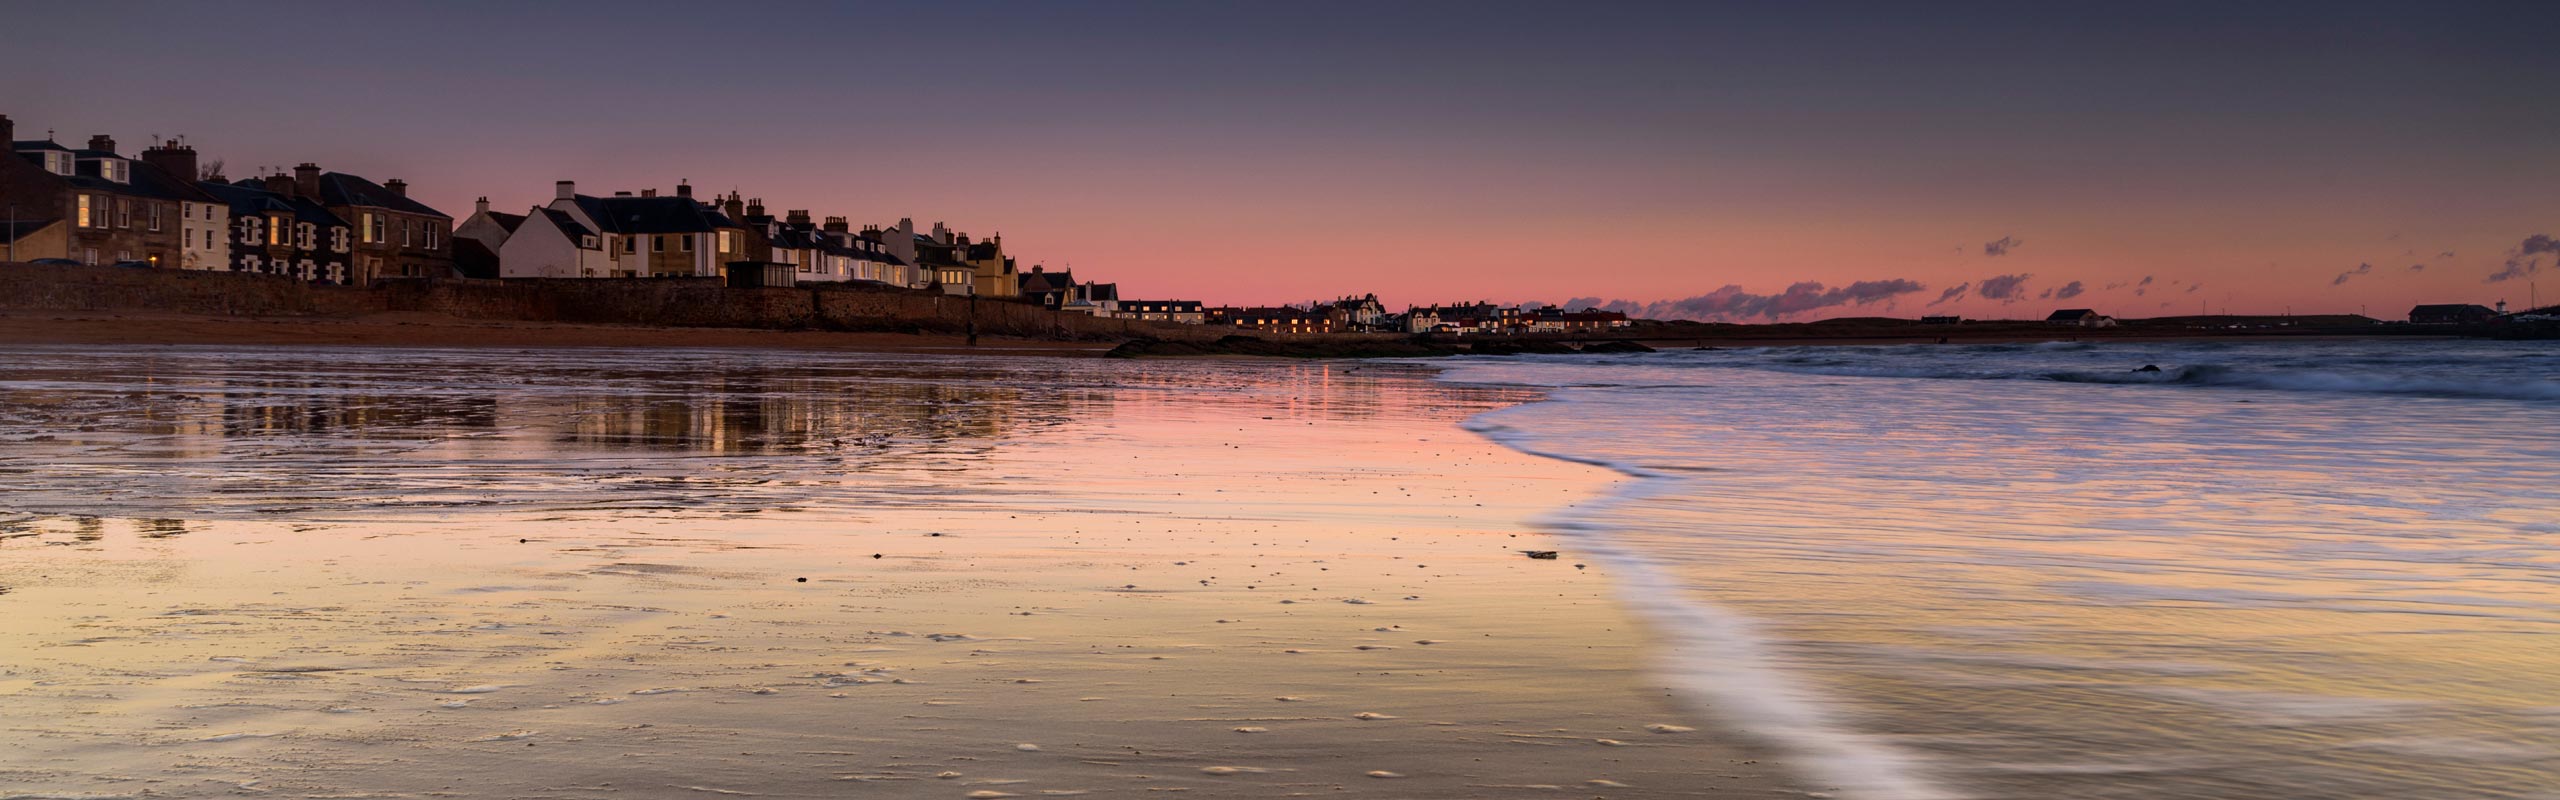 Sunset on the beach in Elie, on the East Neuk of Fife, Scotland.